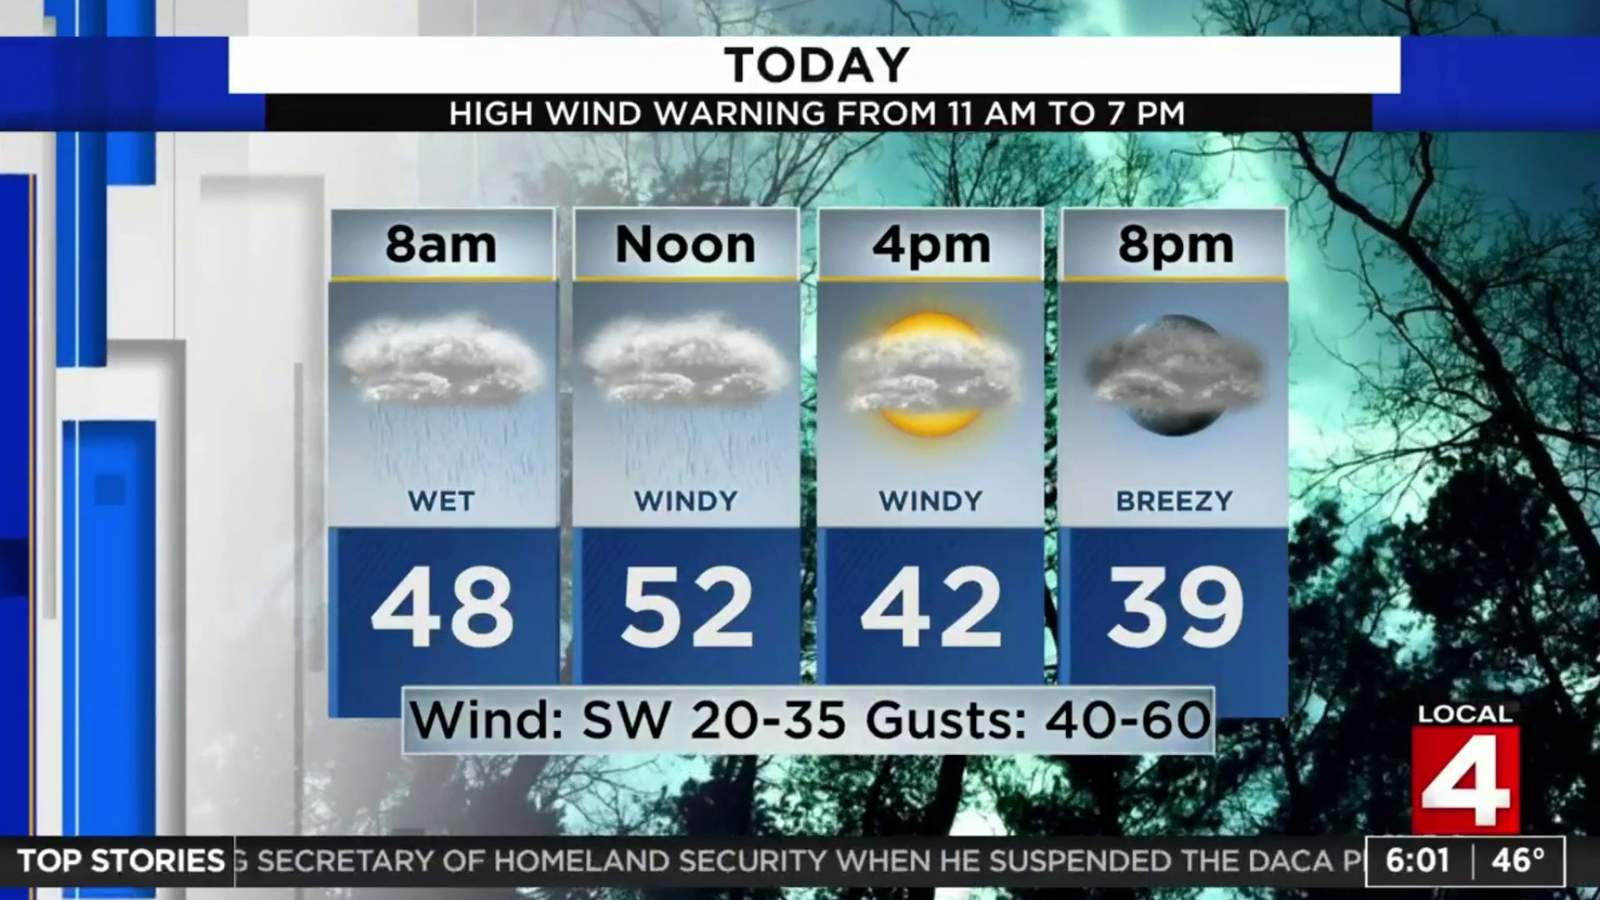 High wind warning issued for Metro Detroit, counties outside region